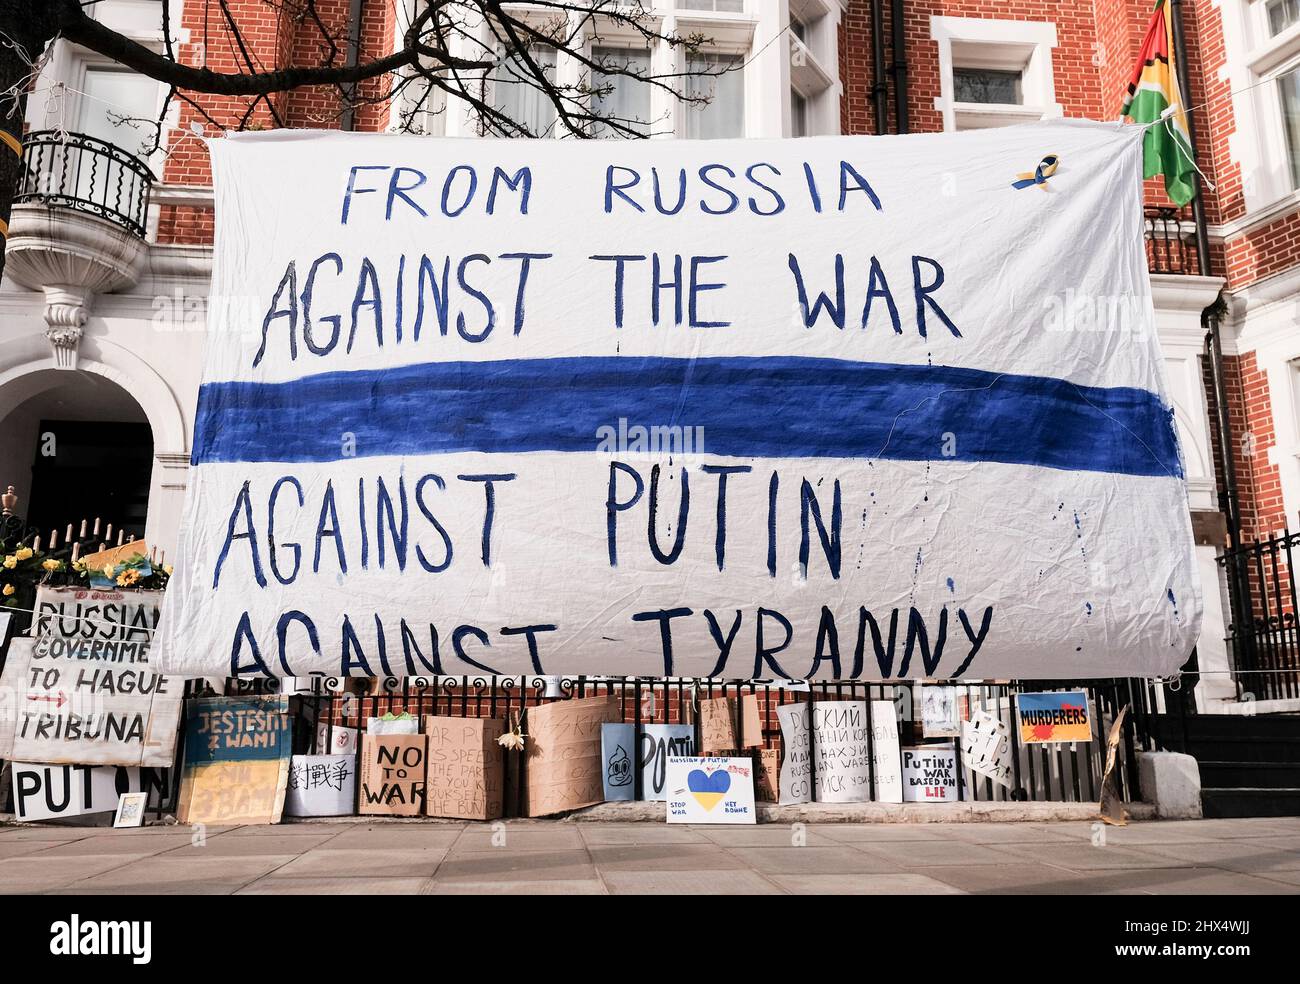 London UK, 9th March 2022. A banner declaring opposition to the war from Russian citizens is displayed opposite the Russian Embassy. The Russians Against War movement has adopted a white and blue flag as a symbol of their protest.The flag replaces the red stripe of the Russian flag to remove the association with blood and violence, along with military power and authoritarianism. It also references the historic flag of Veliky Novgorod, where the government of the Novgorod Republic had a reputation for developing democratic governance. Stock Photo